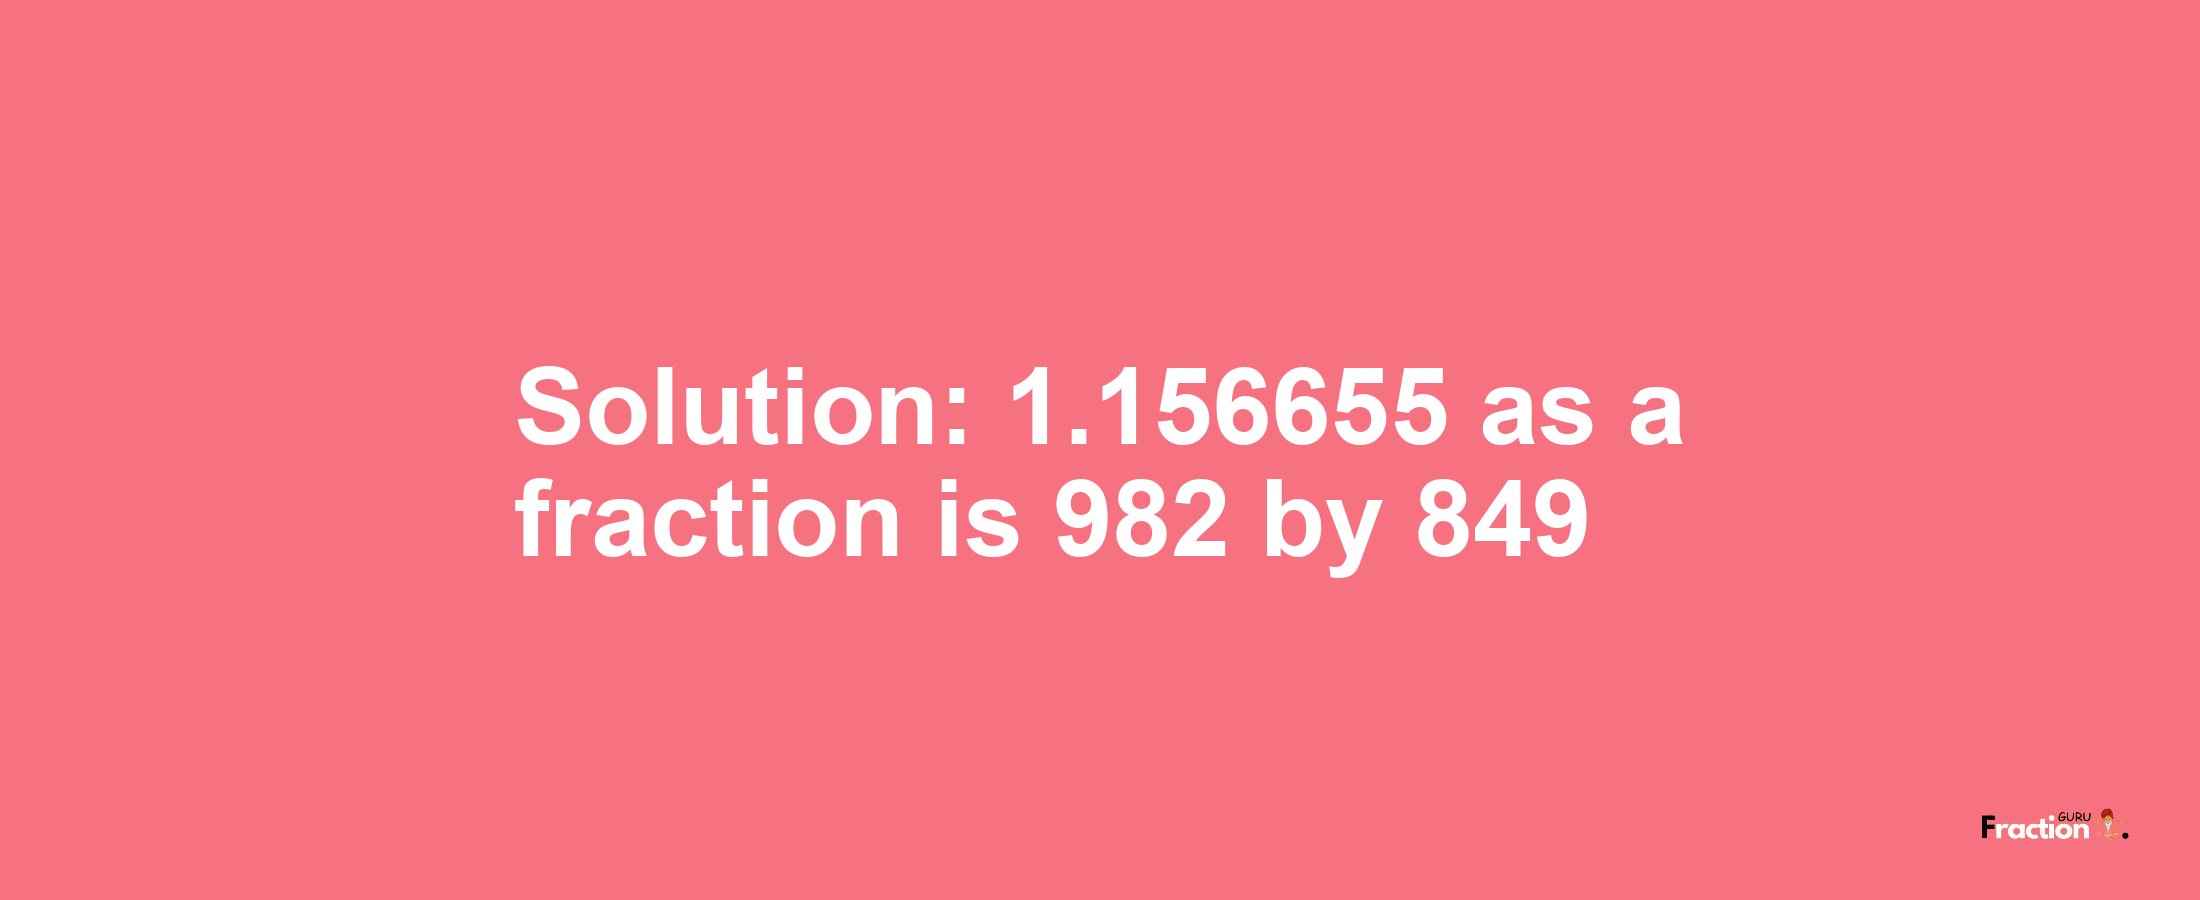 Solution:1.156655 as a fraction is 982/849